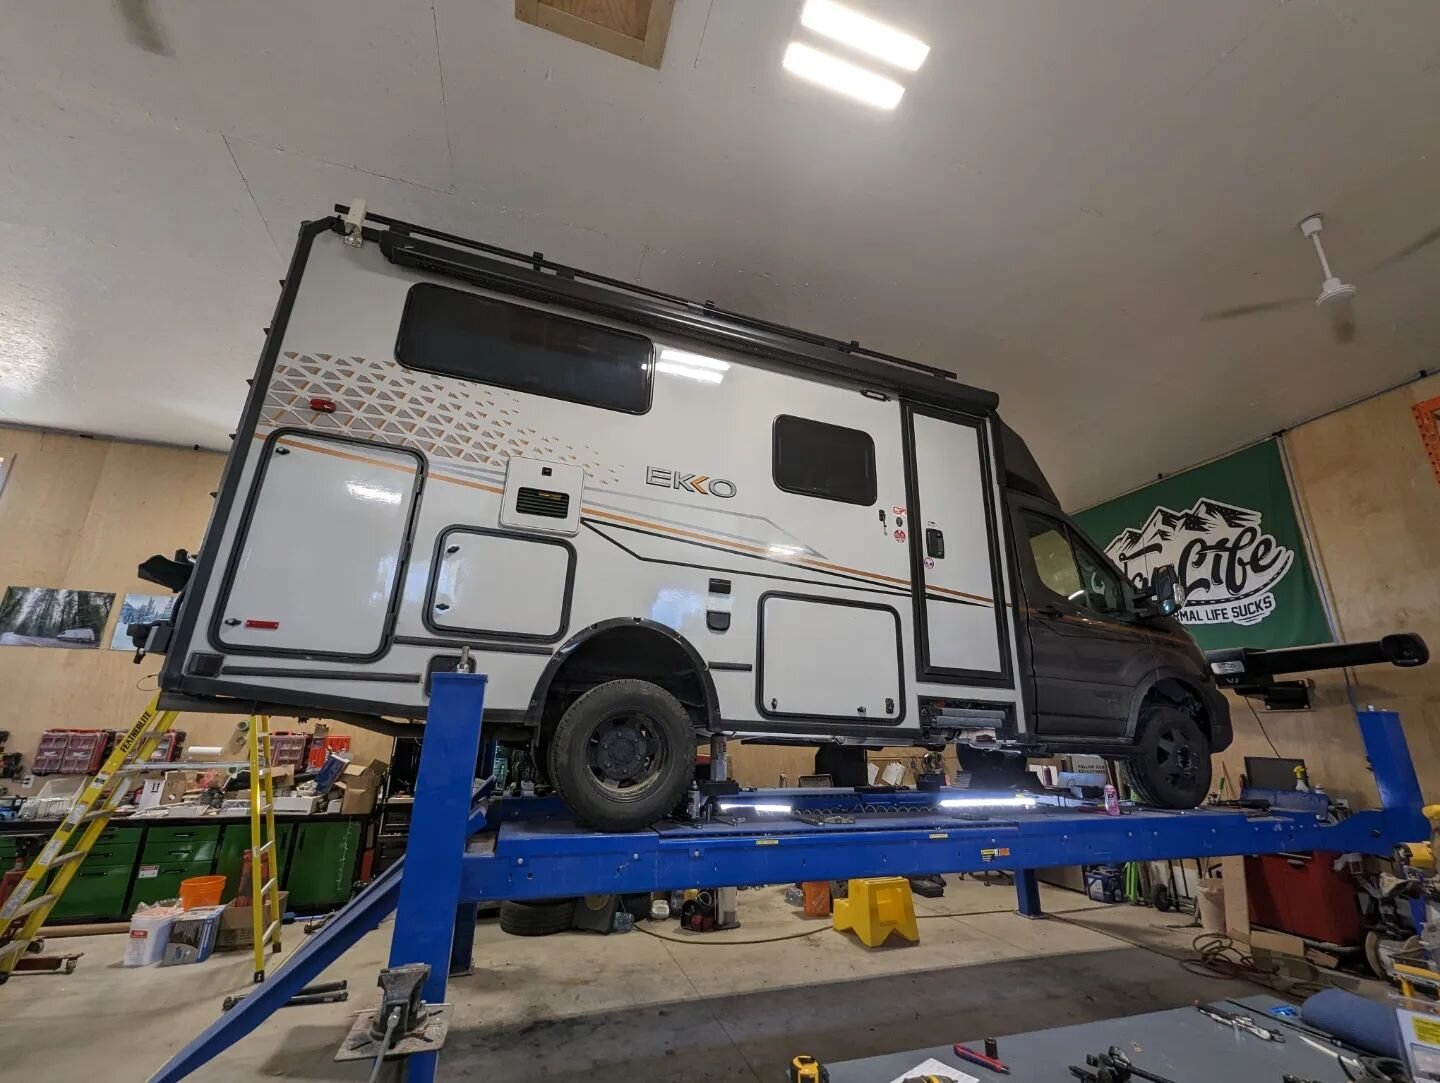 Suspension upgrades! The Winnebago Ekko got a lift kit and suspension upgrade. The Ford F350 got a suspension upgrade so that the camper sags the rear 2&quot; instead of 4&quot;. 
.
.
We have so many exciting projects underway. With snow season appro